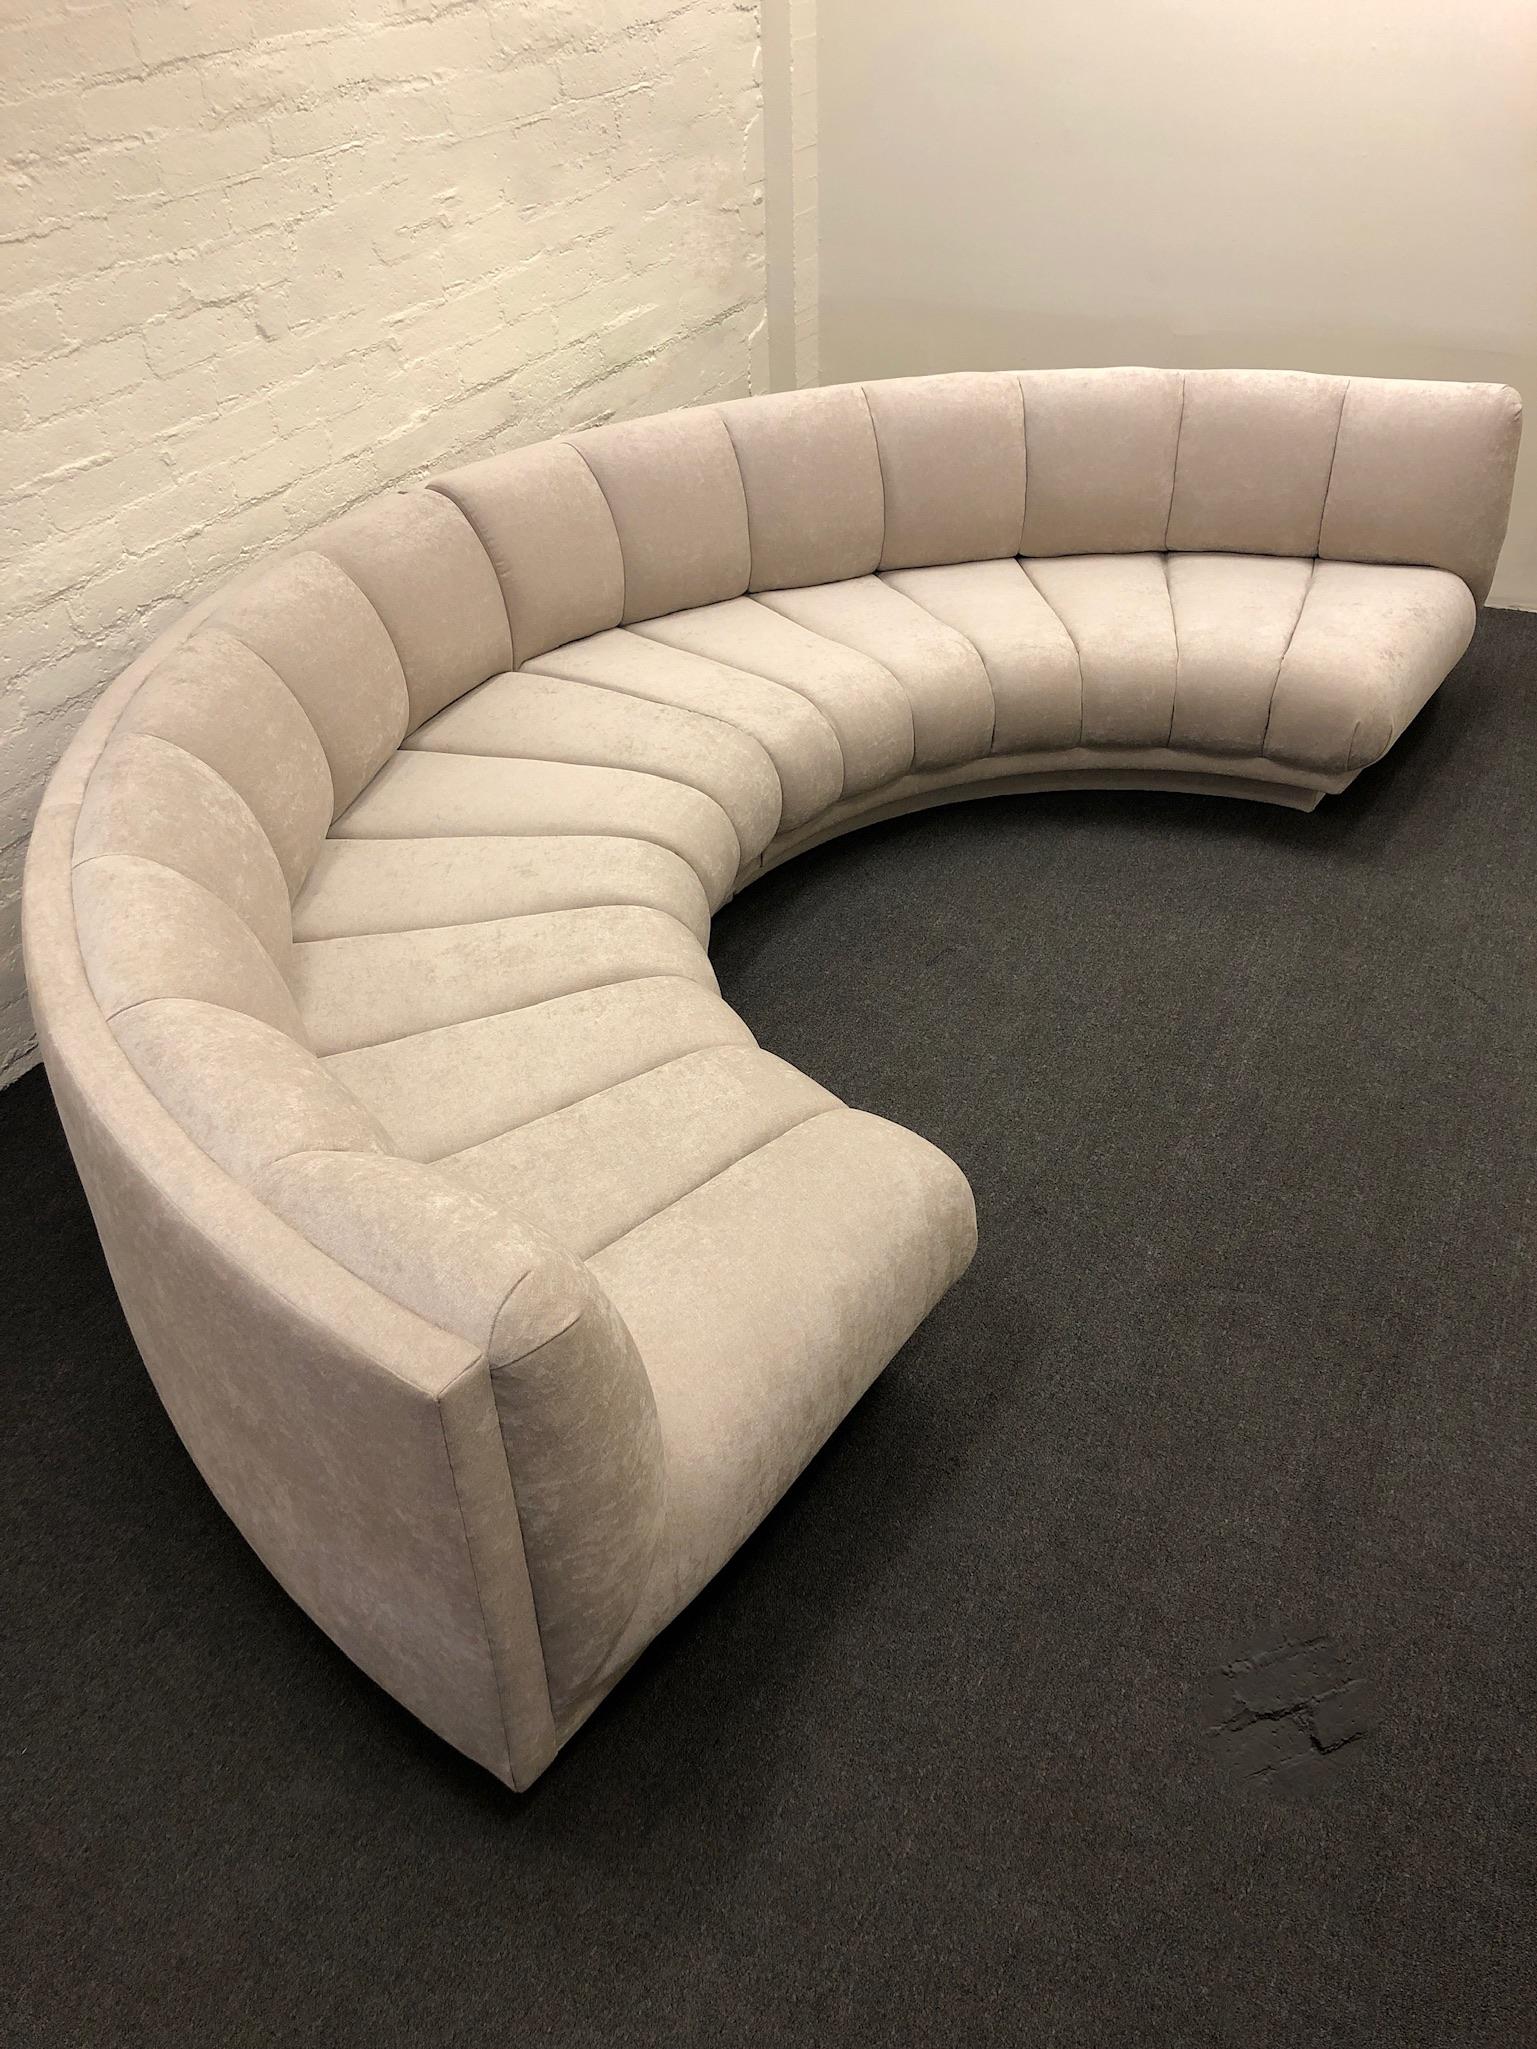 Off White Semi-Circular Channel Sectional Sofa by Steve Chase  In Excellent Condition For Sale In Palm Springs, CA